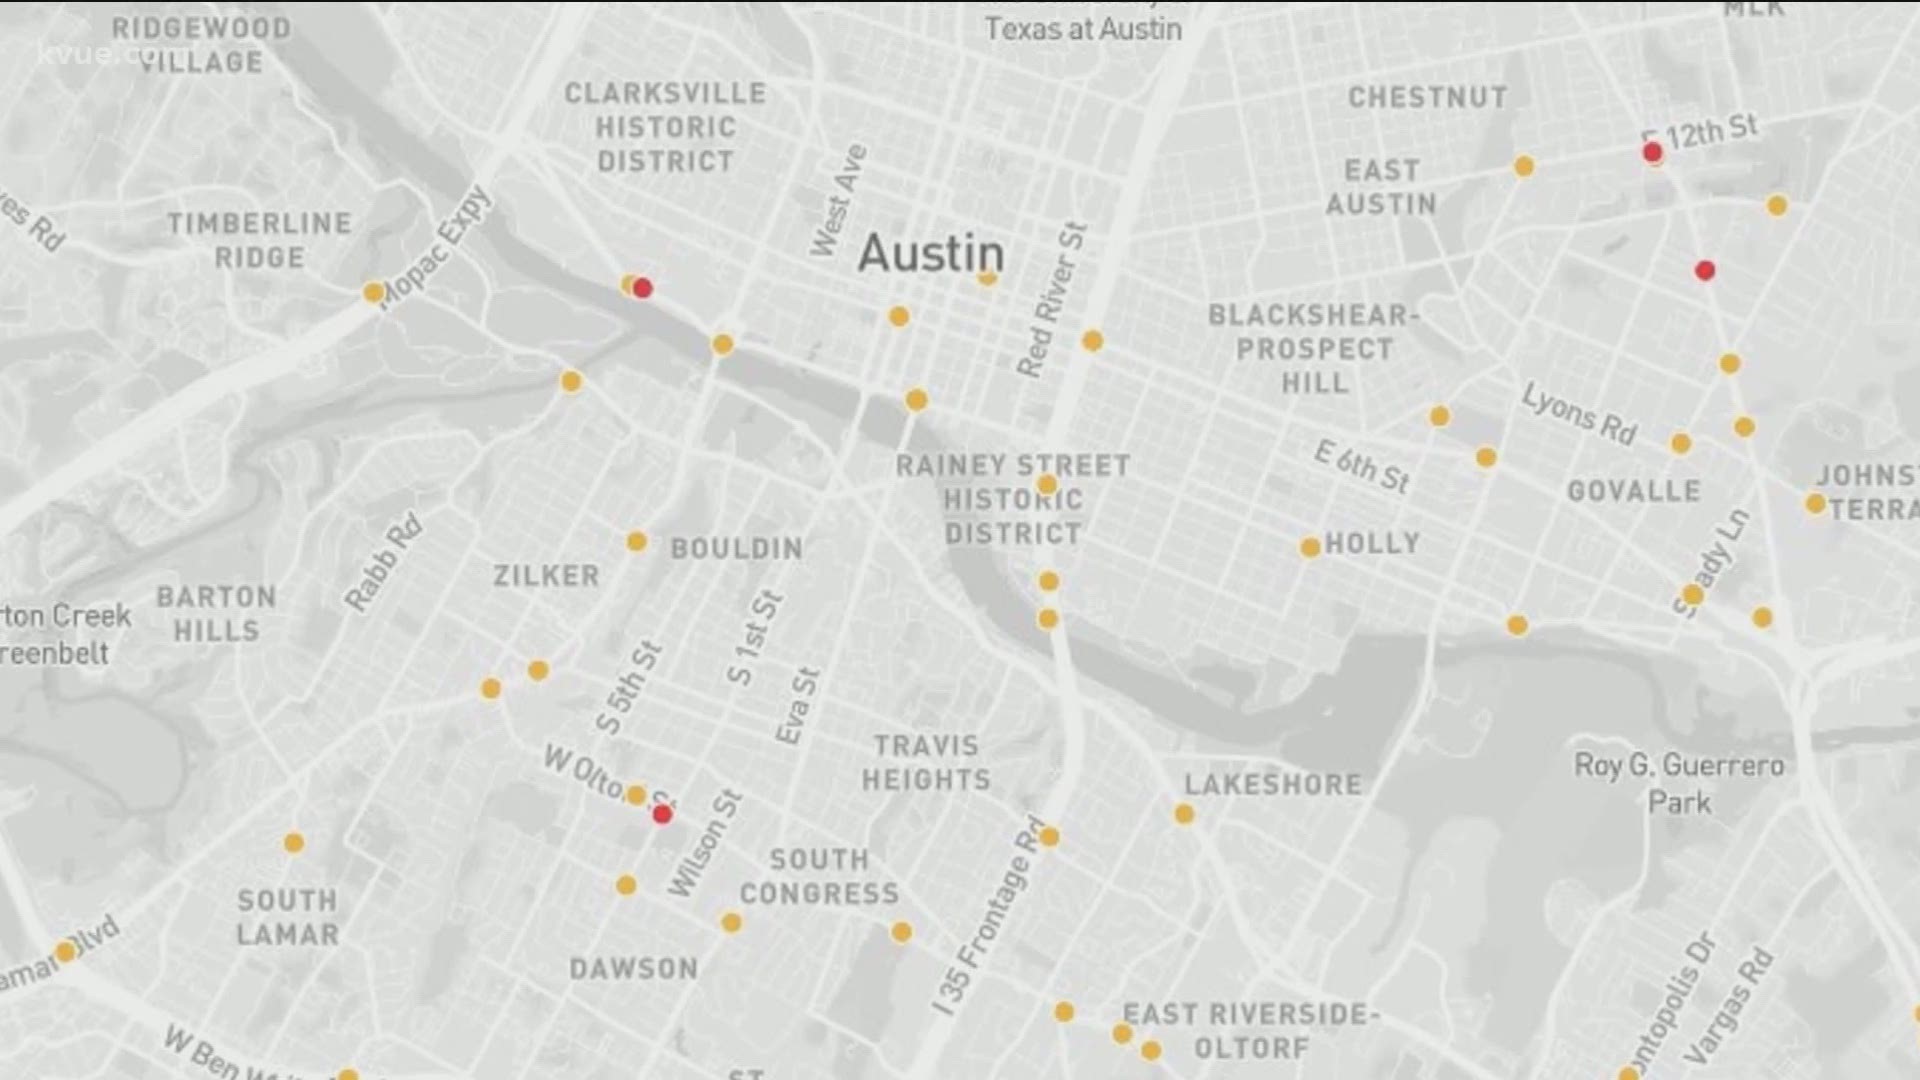 The City of Austin is using its "Vision Zero" program to figure out which roads are dangerous and need safety improvements.